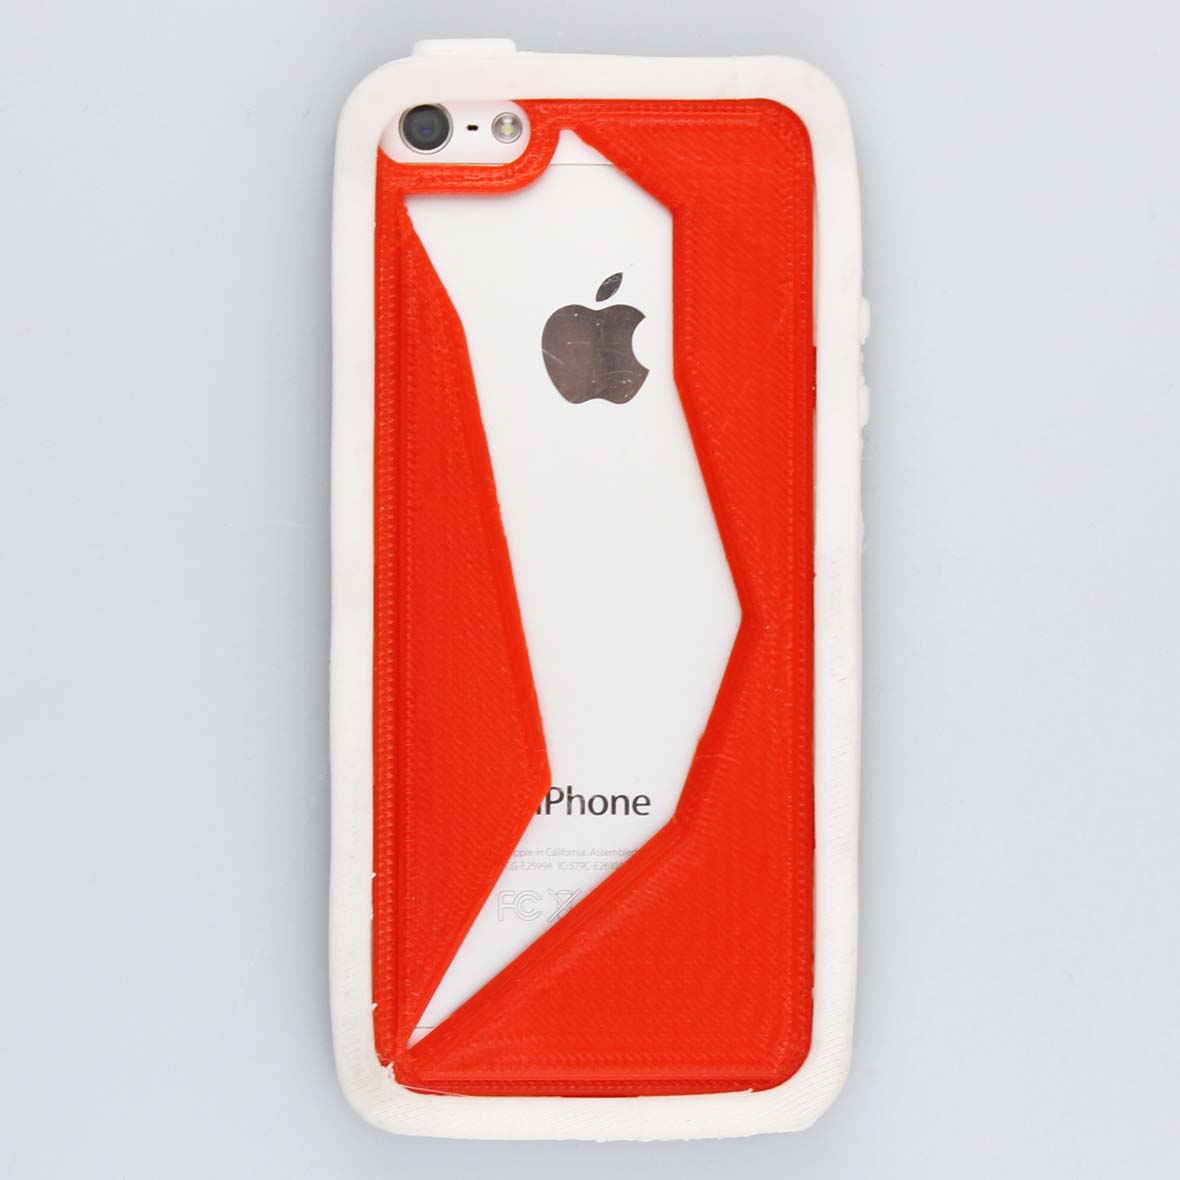 Biological Extra-Terrestre iPhone Cover